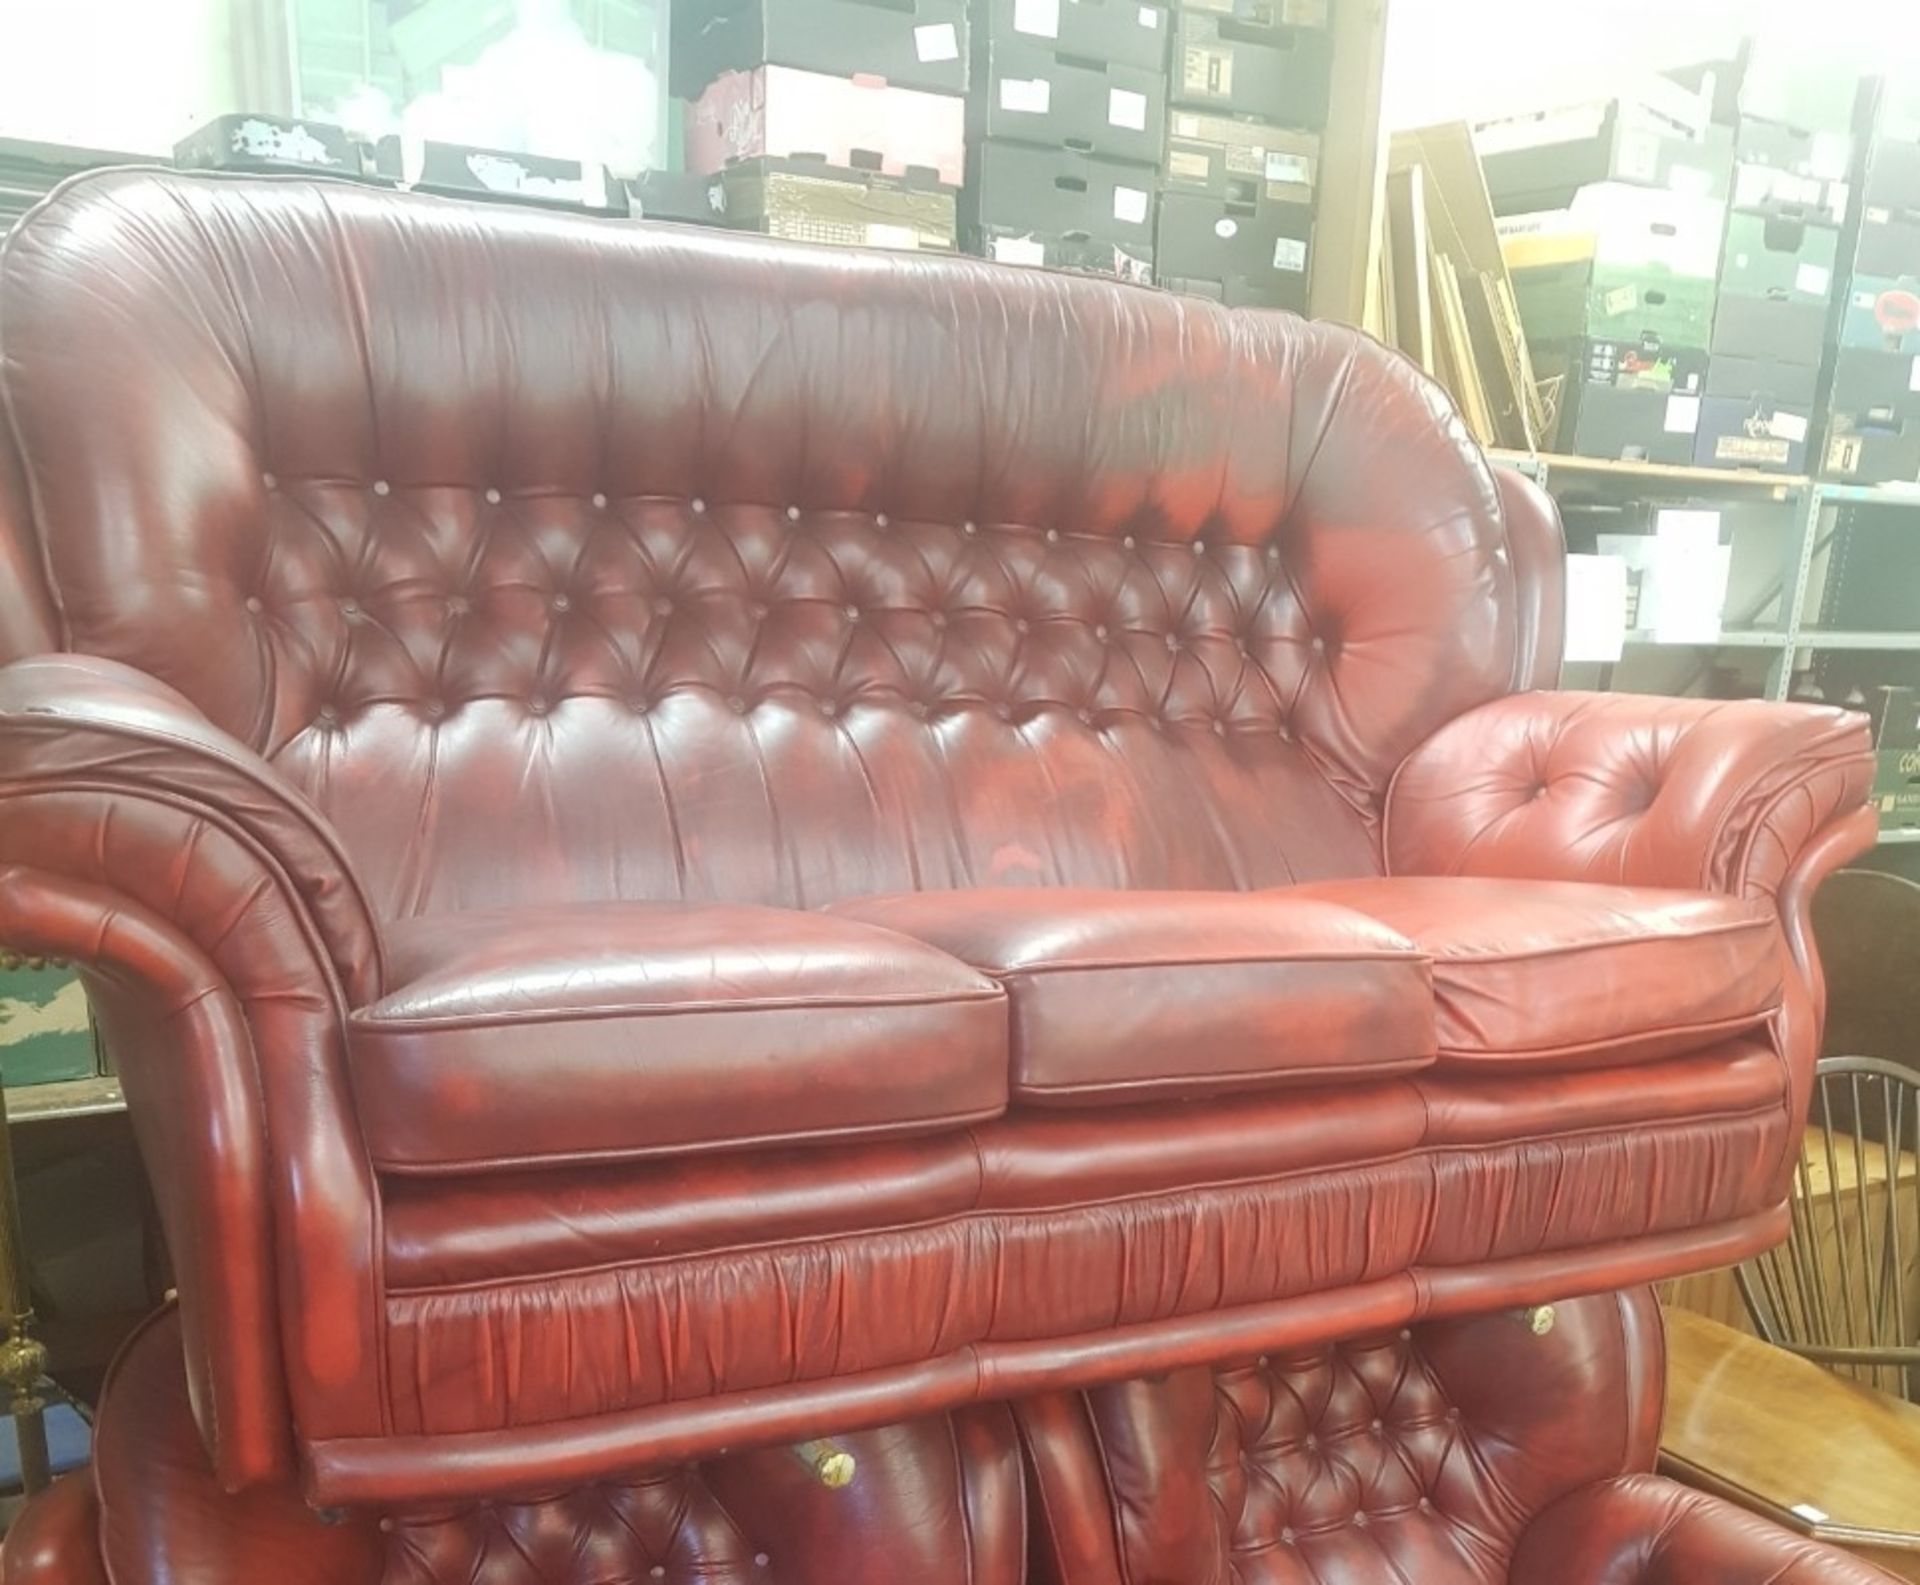 Oxblood leather Chesterfield high back 3 seater sofa.